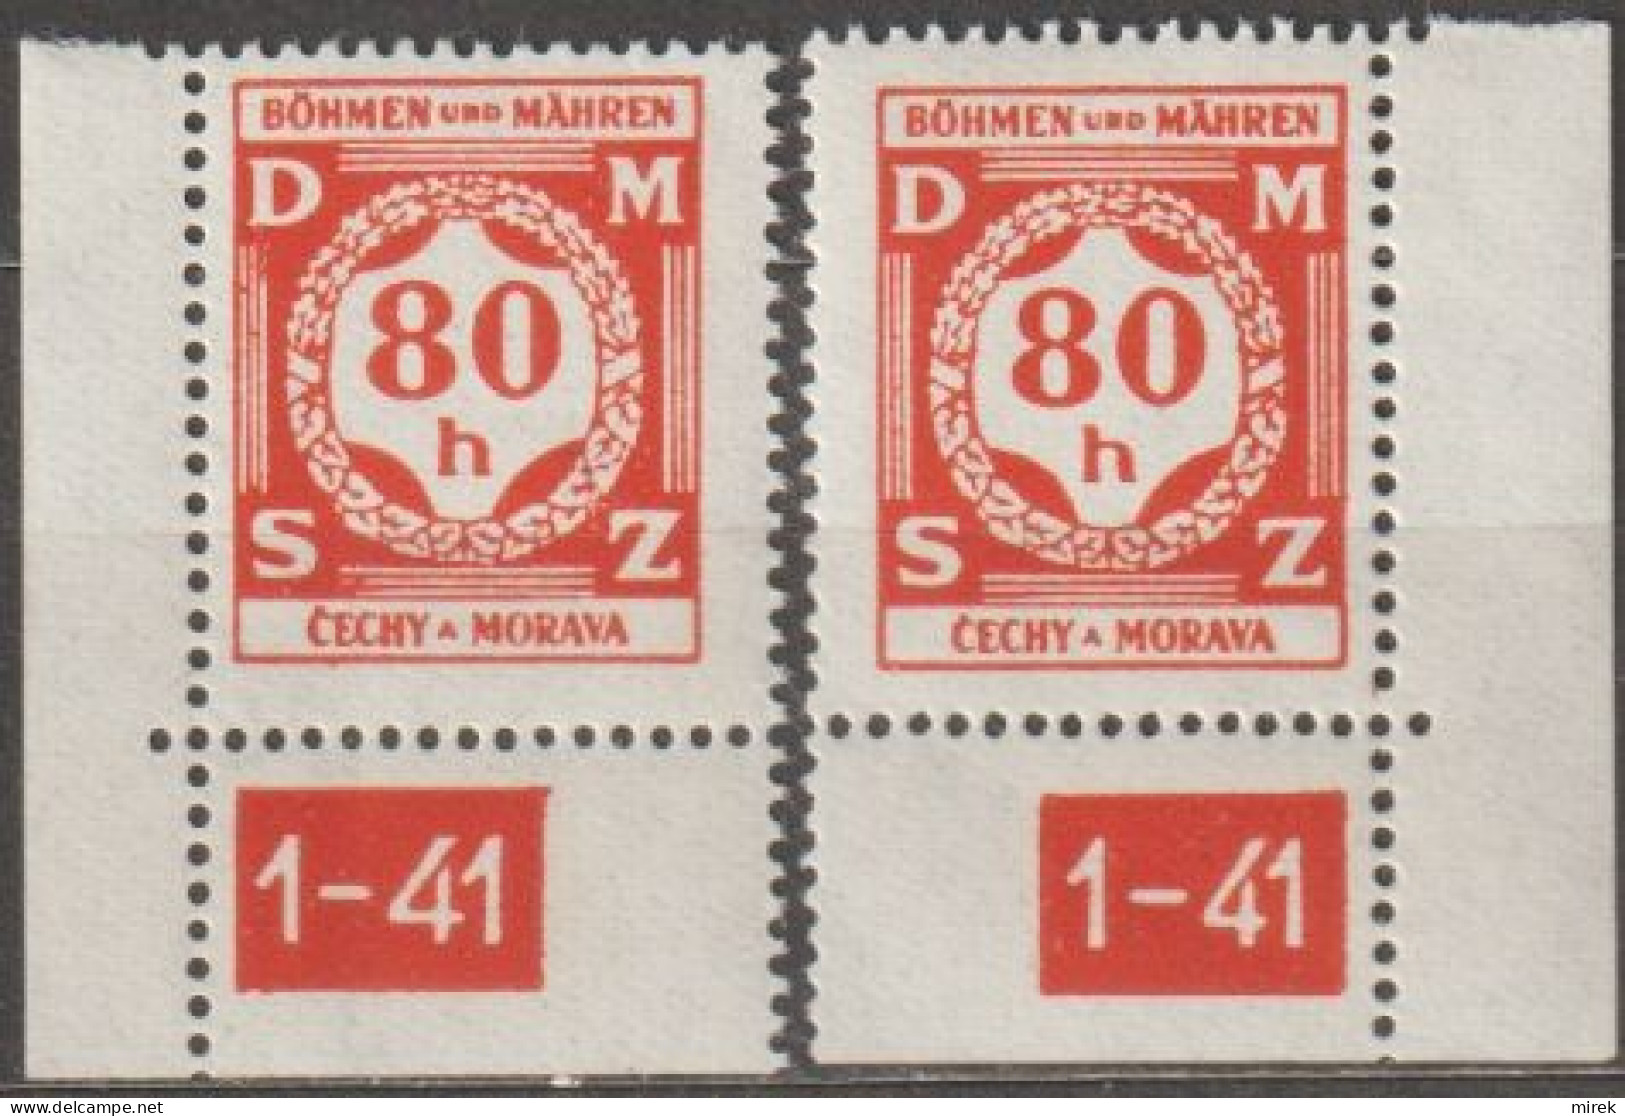 30a/ Pof. SL 5, Corner Stamps, Plate Number 1-41 - Neufs